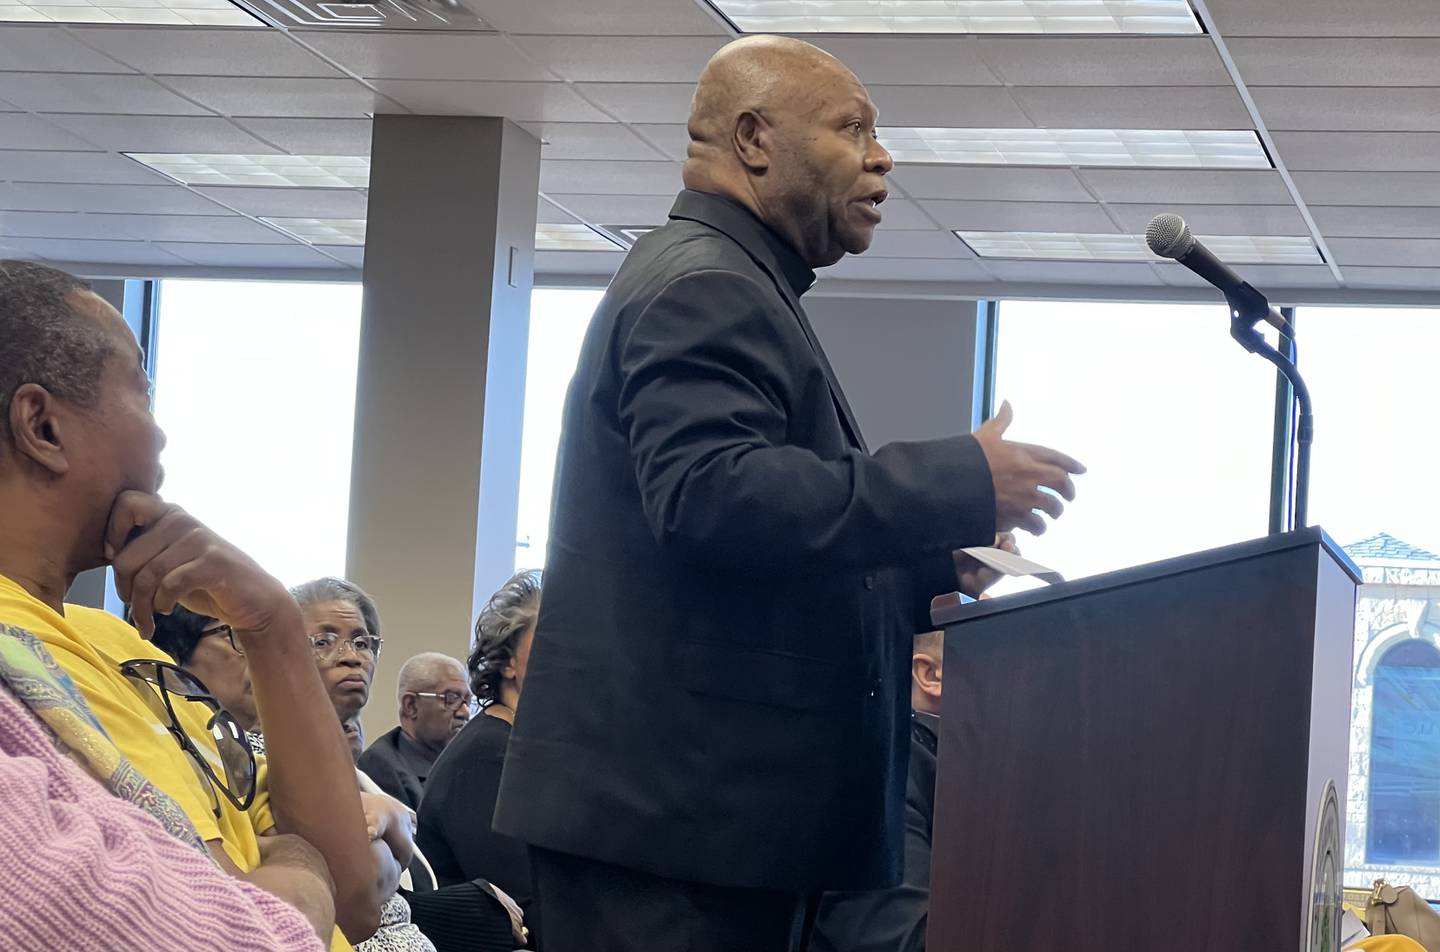 Westly Coats, an associate pastor at Israel of God Church in Sycamore came to the April 10, 2023 Sycamore Planning and Zoning Commission meeting to talk about his concerns with a marijuana craft grower facility operating near the church.